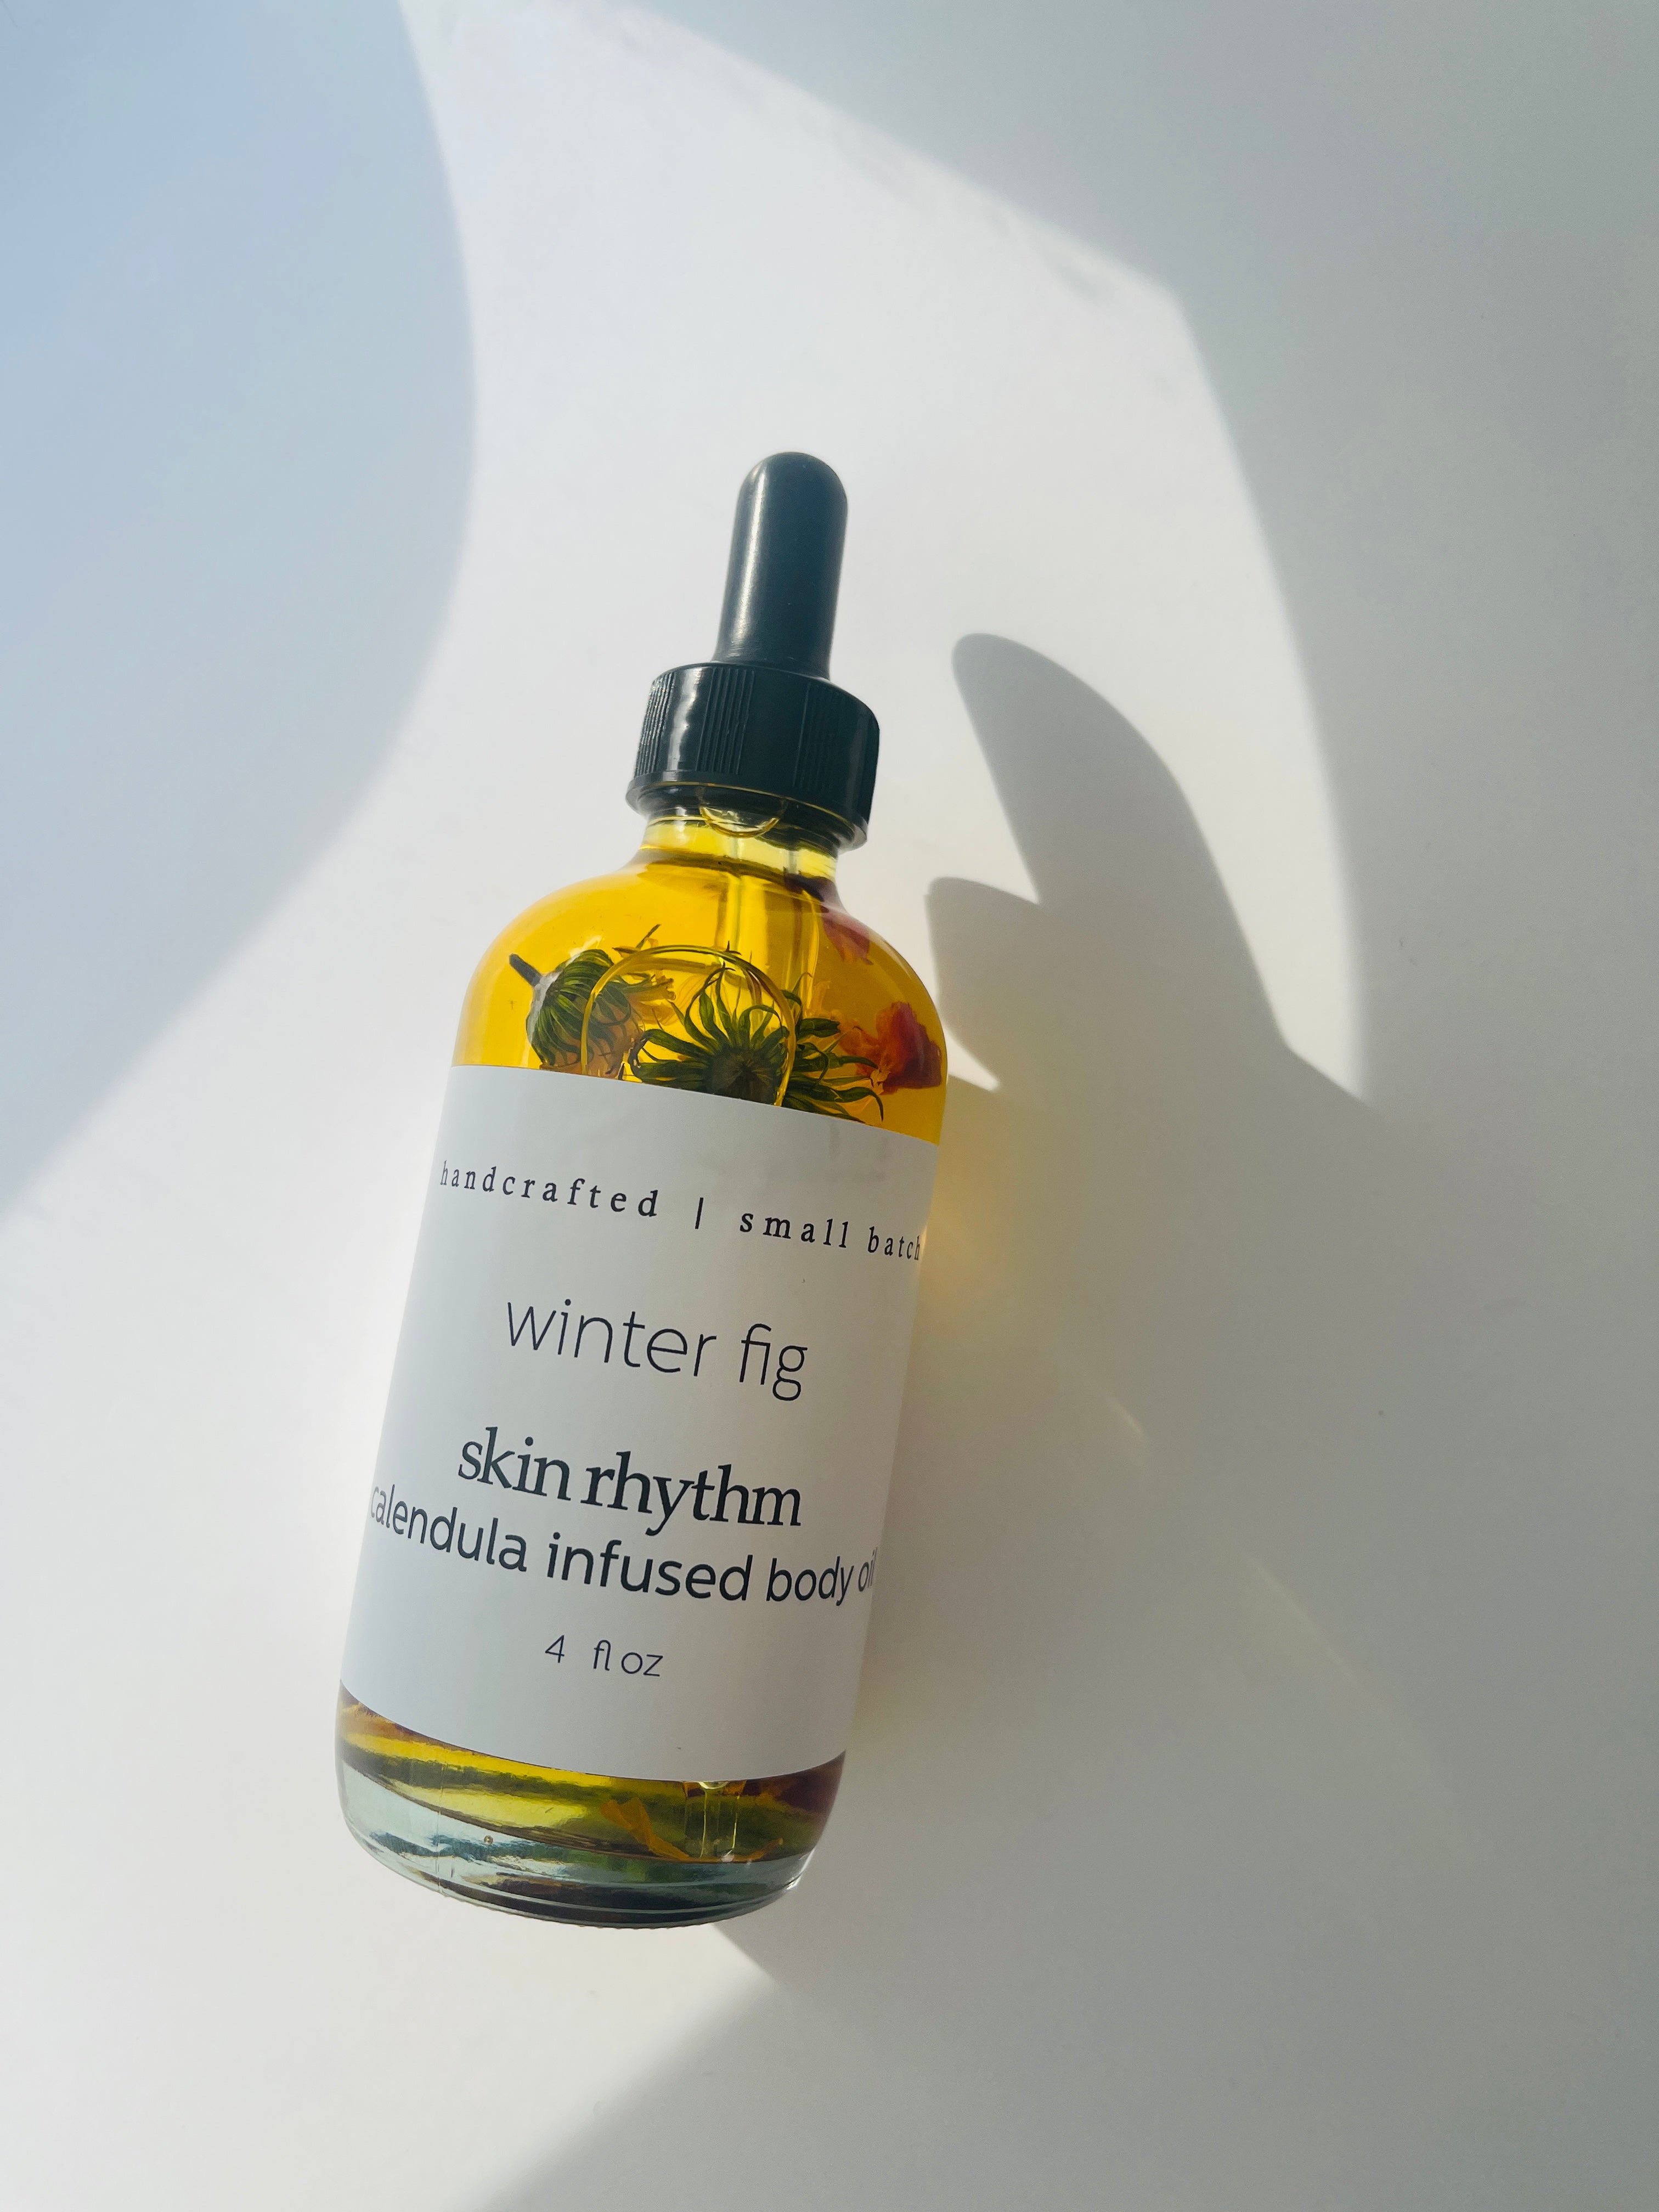 Infused Body Oil